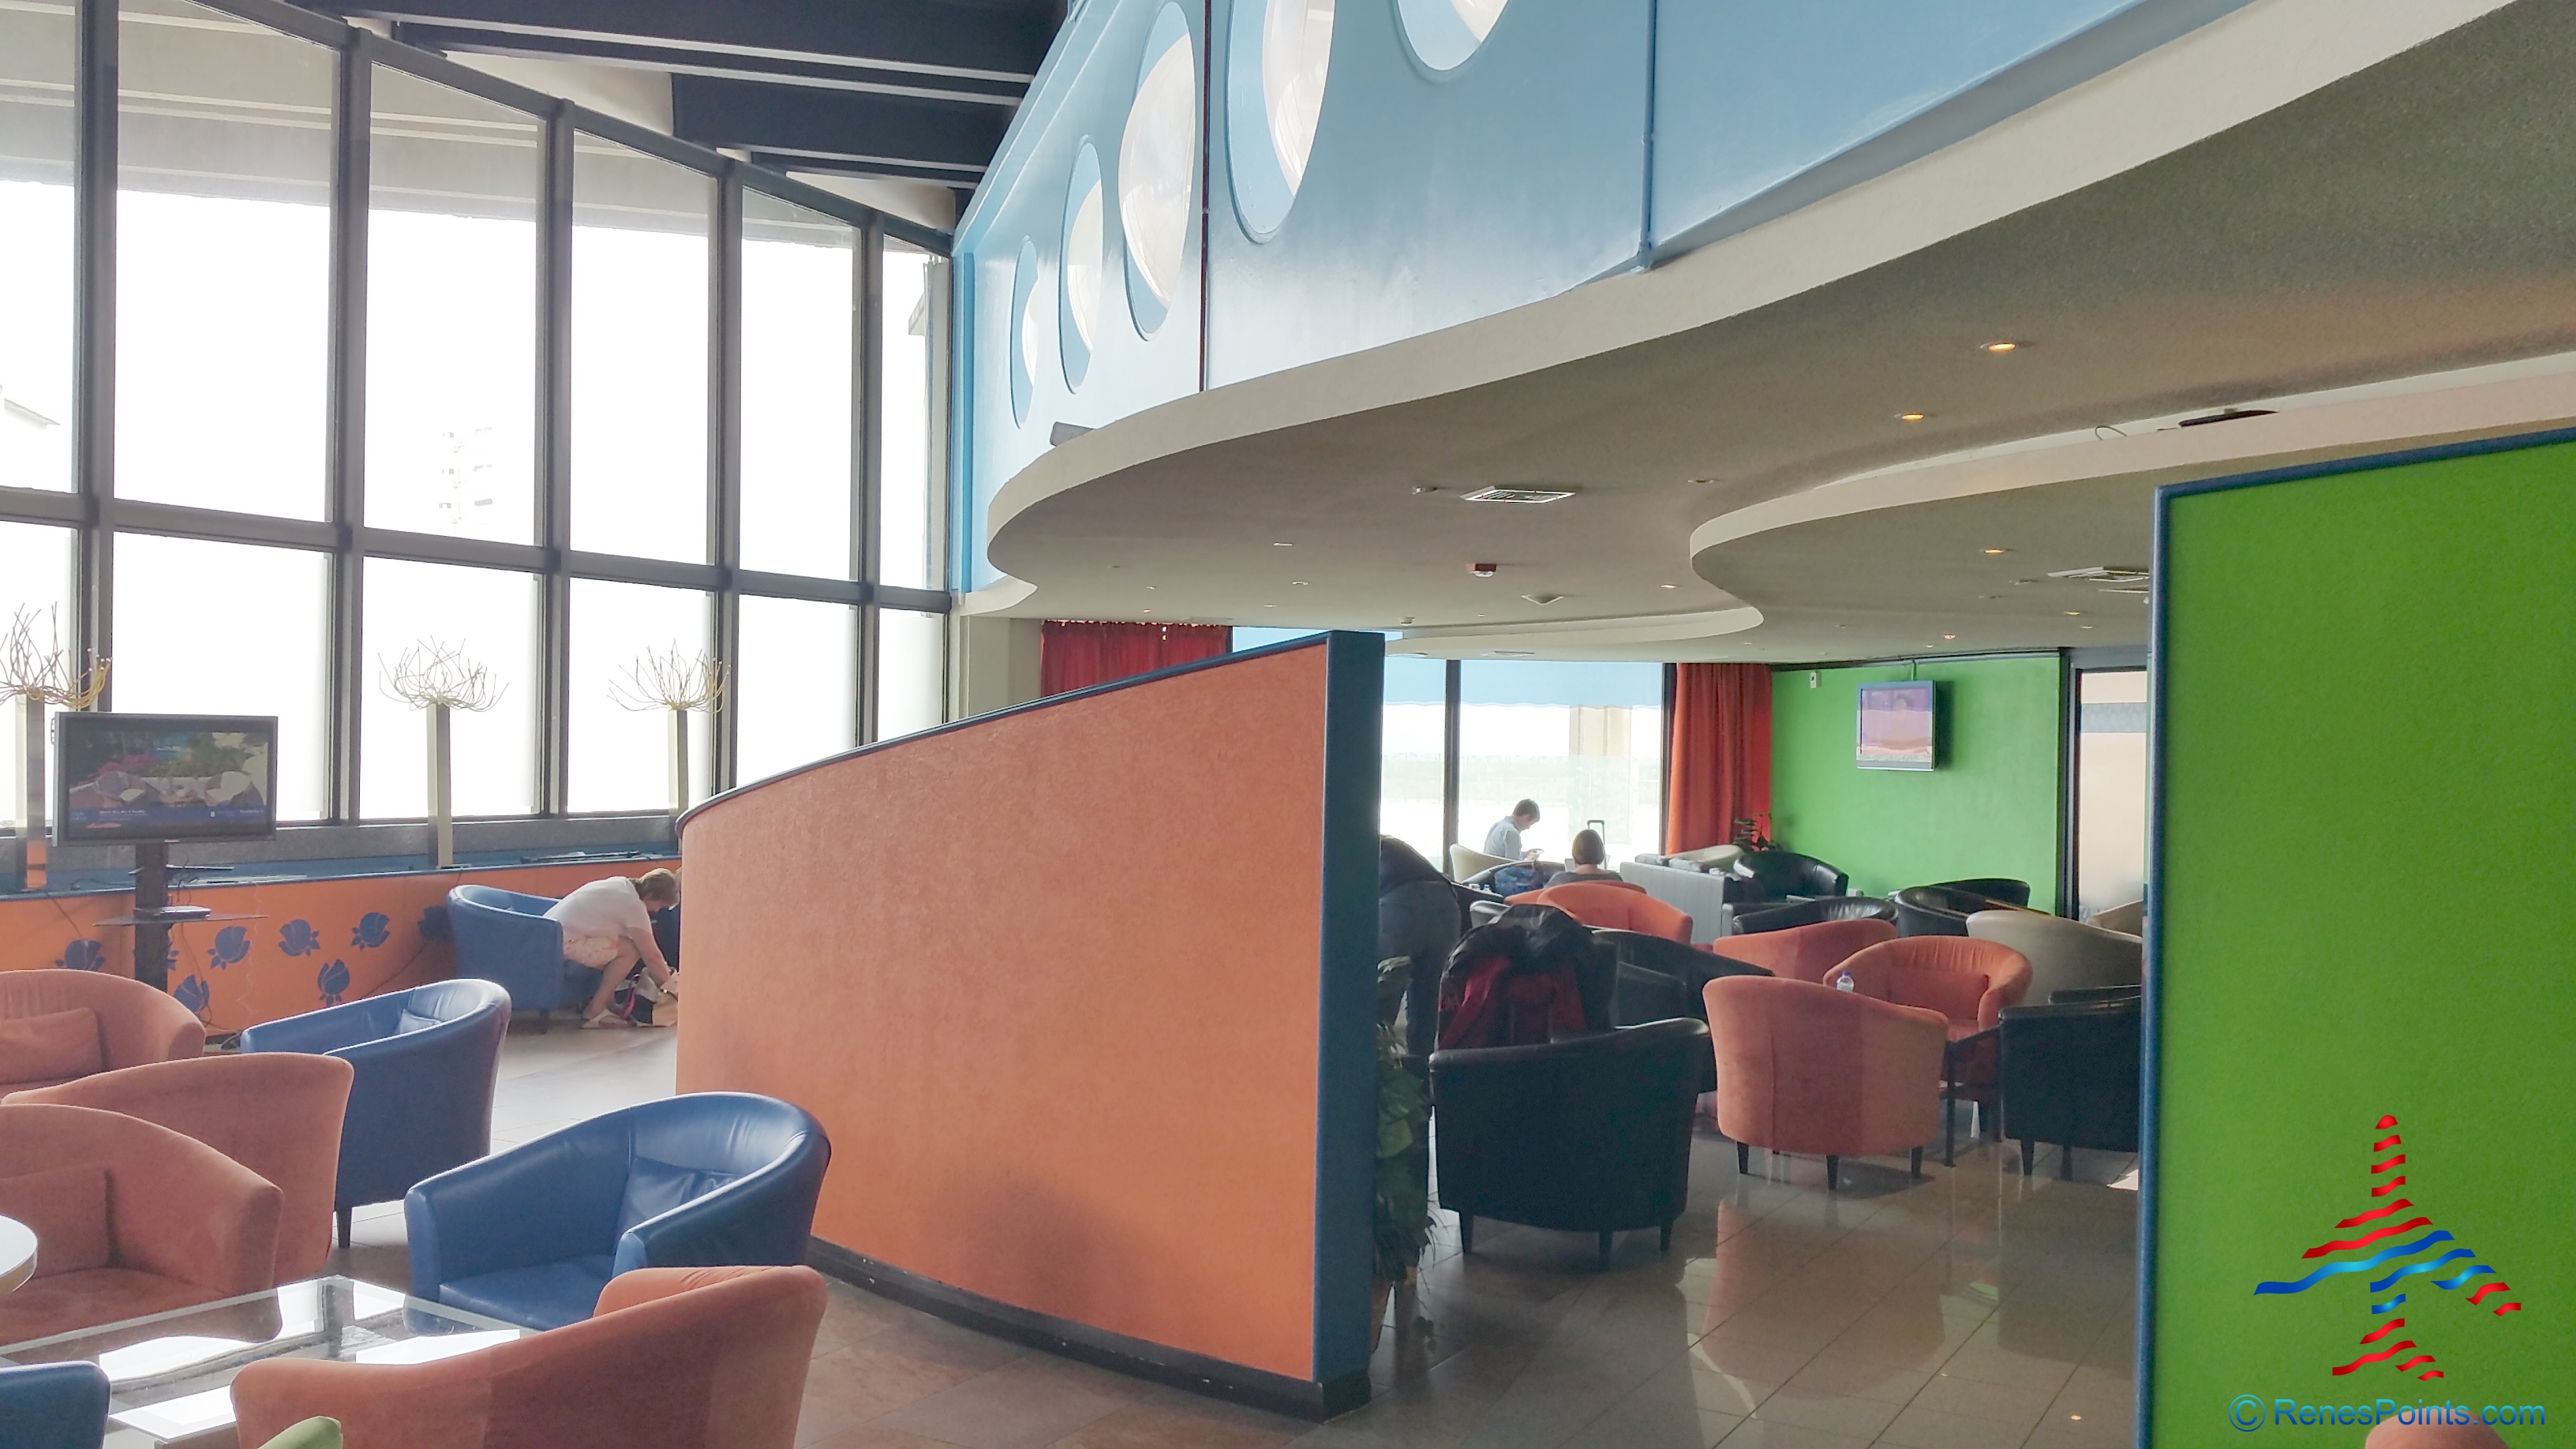 Airlines Executive Lounge Barbados BGI Airport Priority Pass Lounge RenesPoints Blog Review 7 